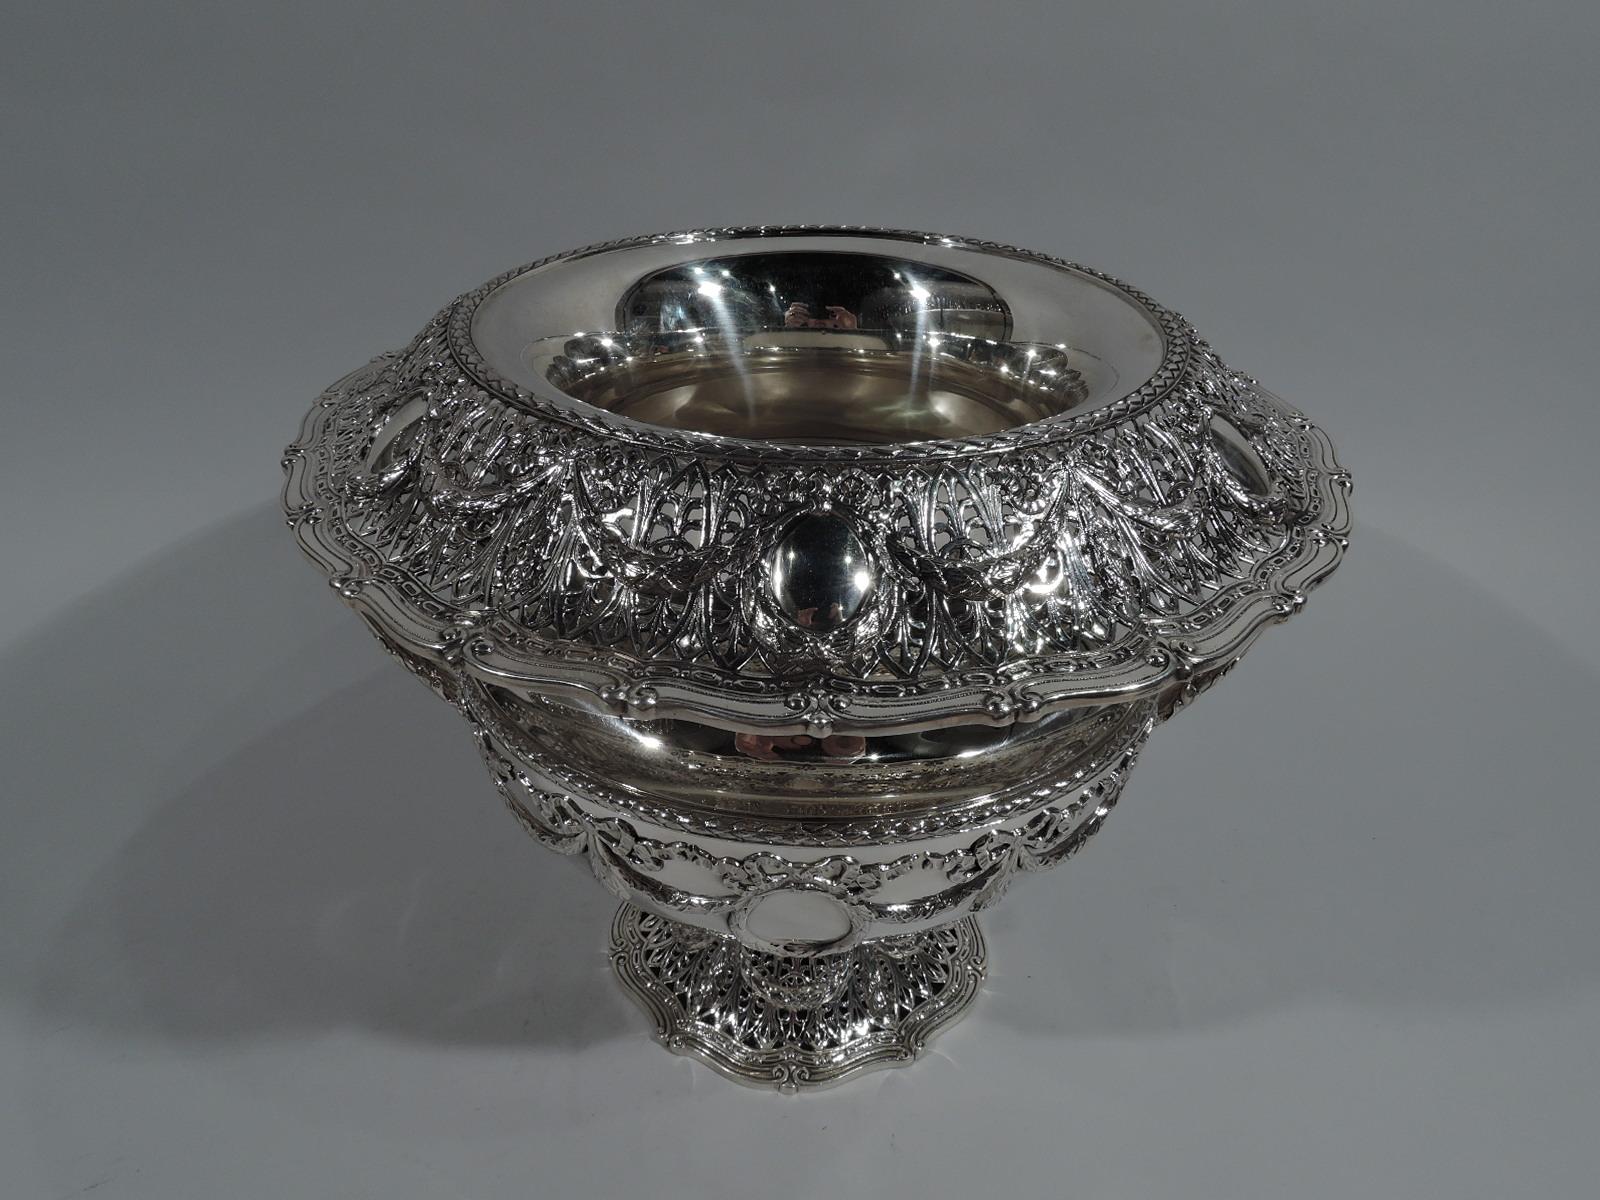 Edwardian Regency sterling silver wine cooler in Adam pattern. Made by Shreve & Co. in San Francisco, ca 1915. Bellied bowl, inset concave neck, turned-down and scrolled rim, and domed and scrolled foot. Leaf-capped and wrapped high-looping side